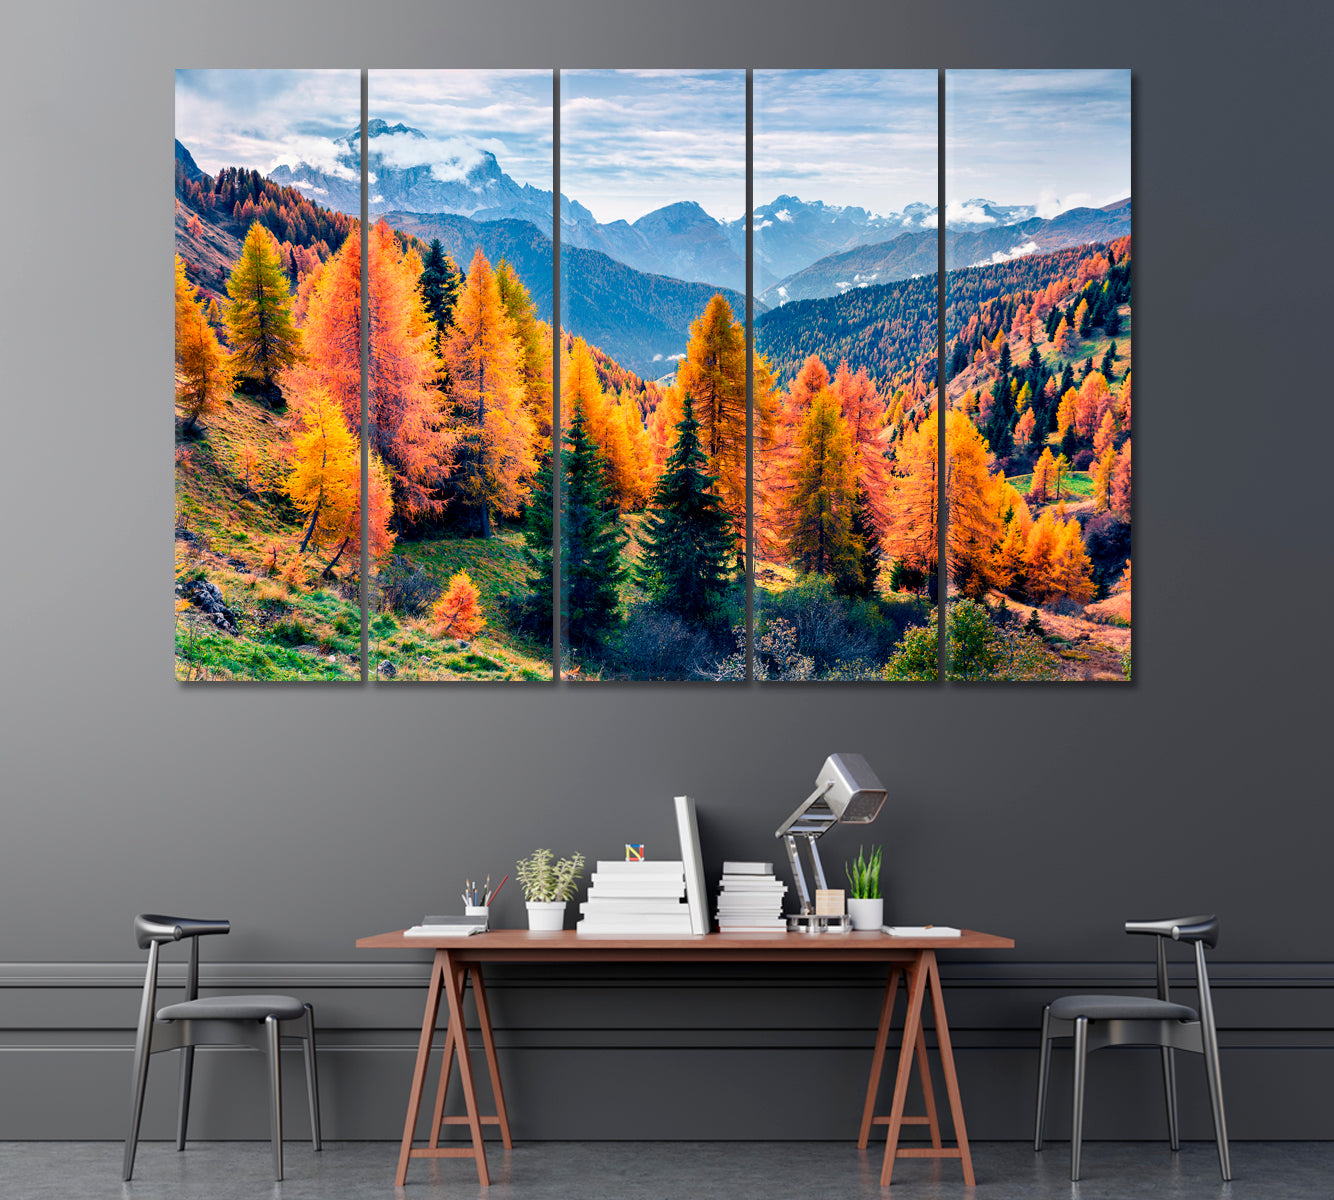 Autumn Forest in Dolomites Alps Italy Canvas Print ArtLexy 5 Panels 36"x24" inches 